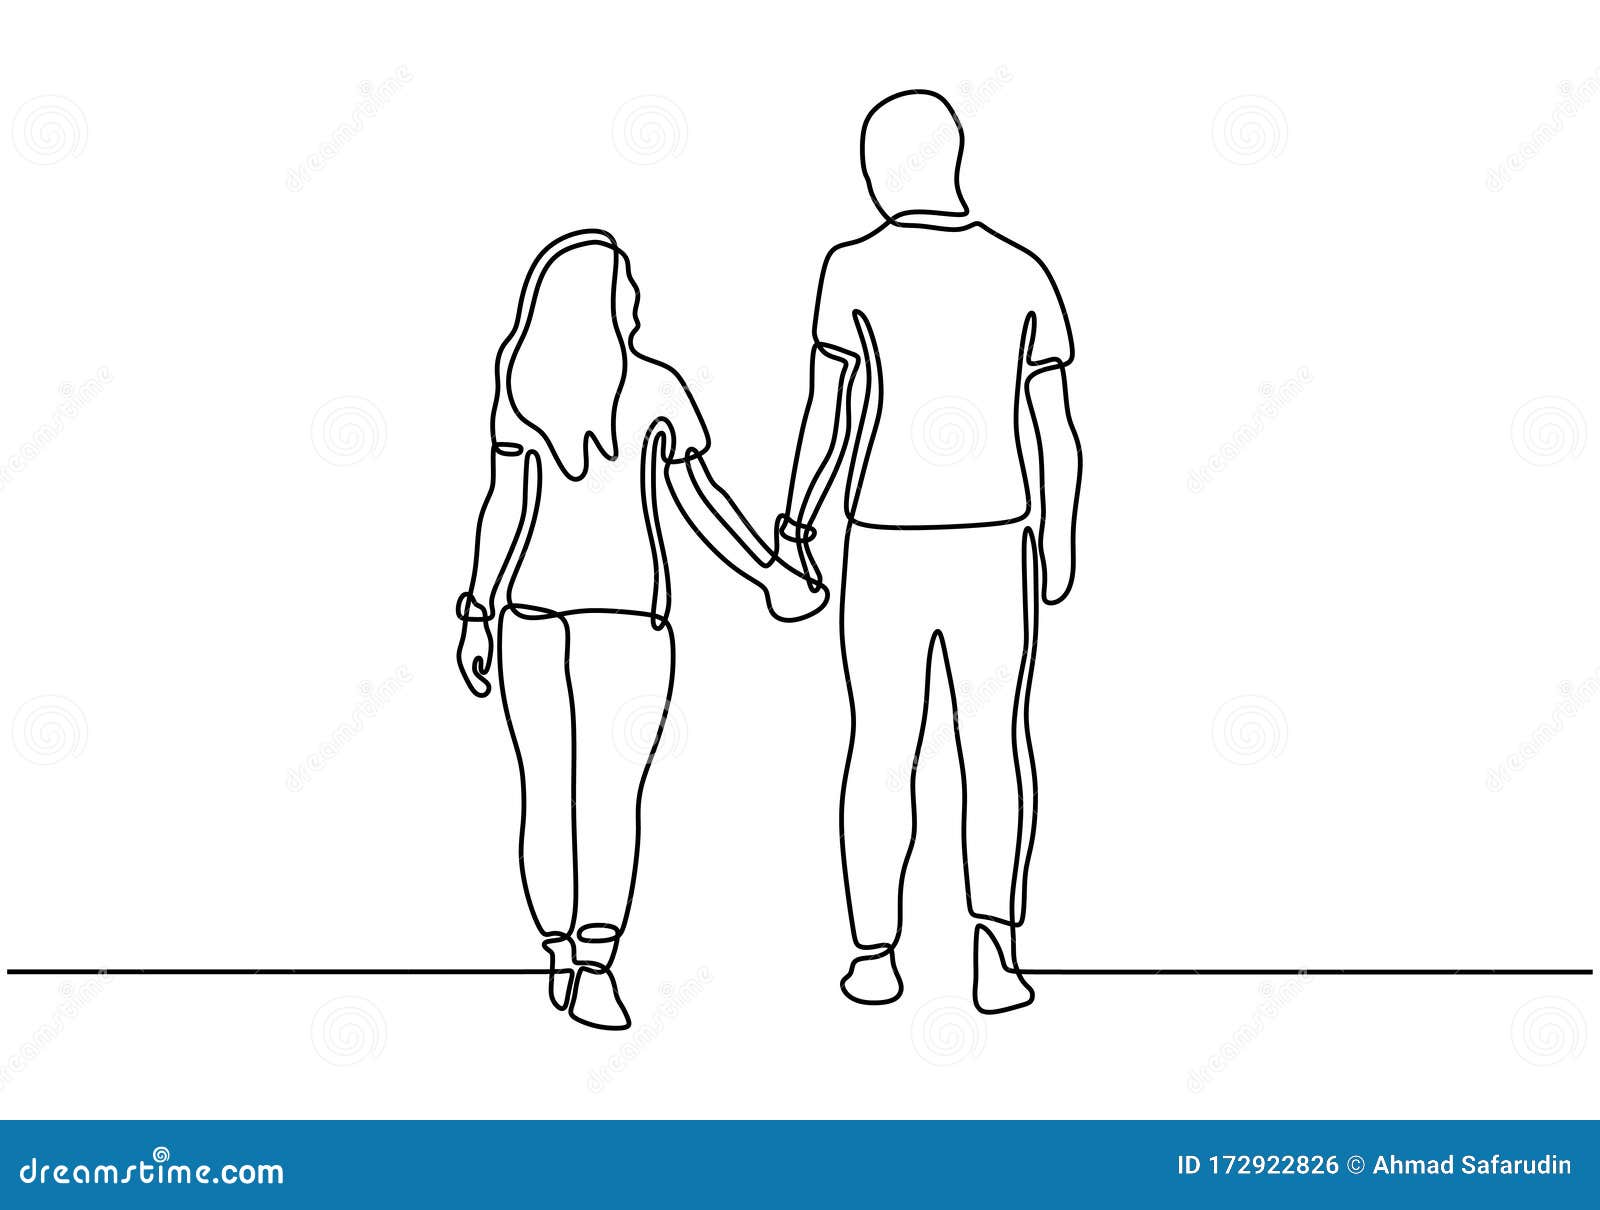 One Line Drawing Couple Holding Hands. Romantic Theme Design, Vector